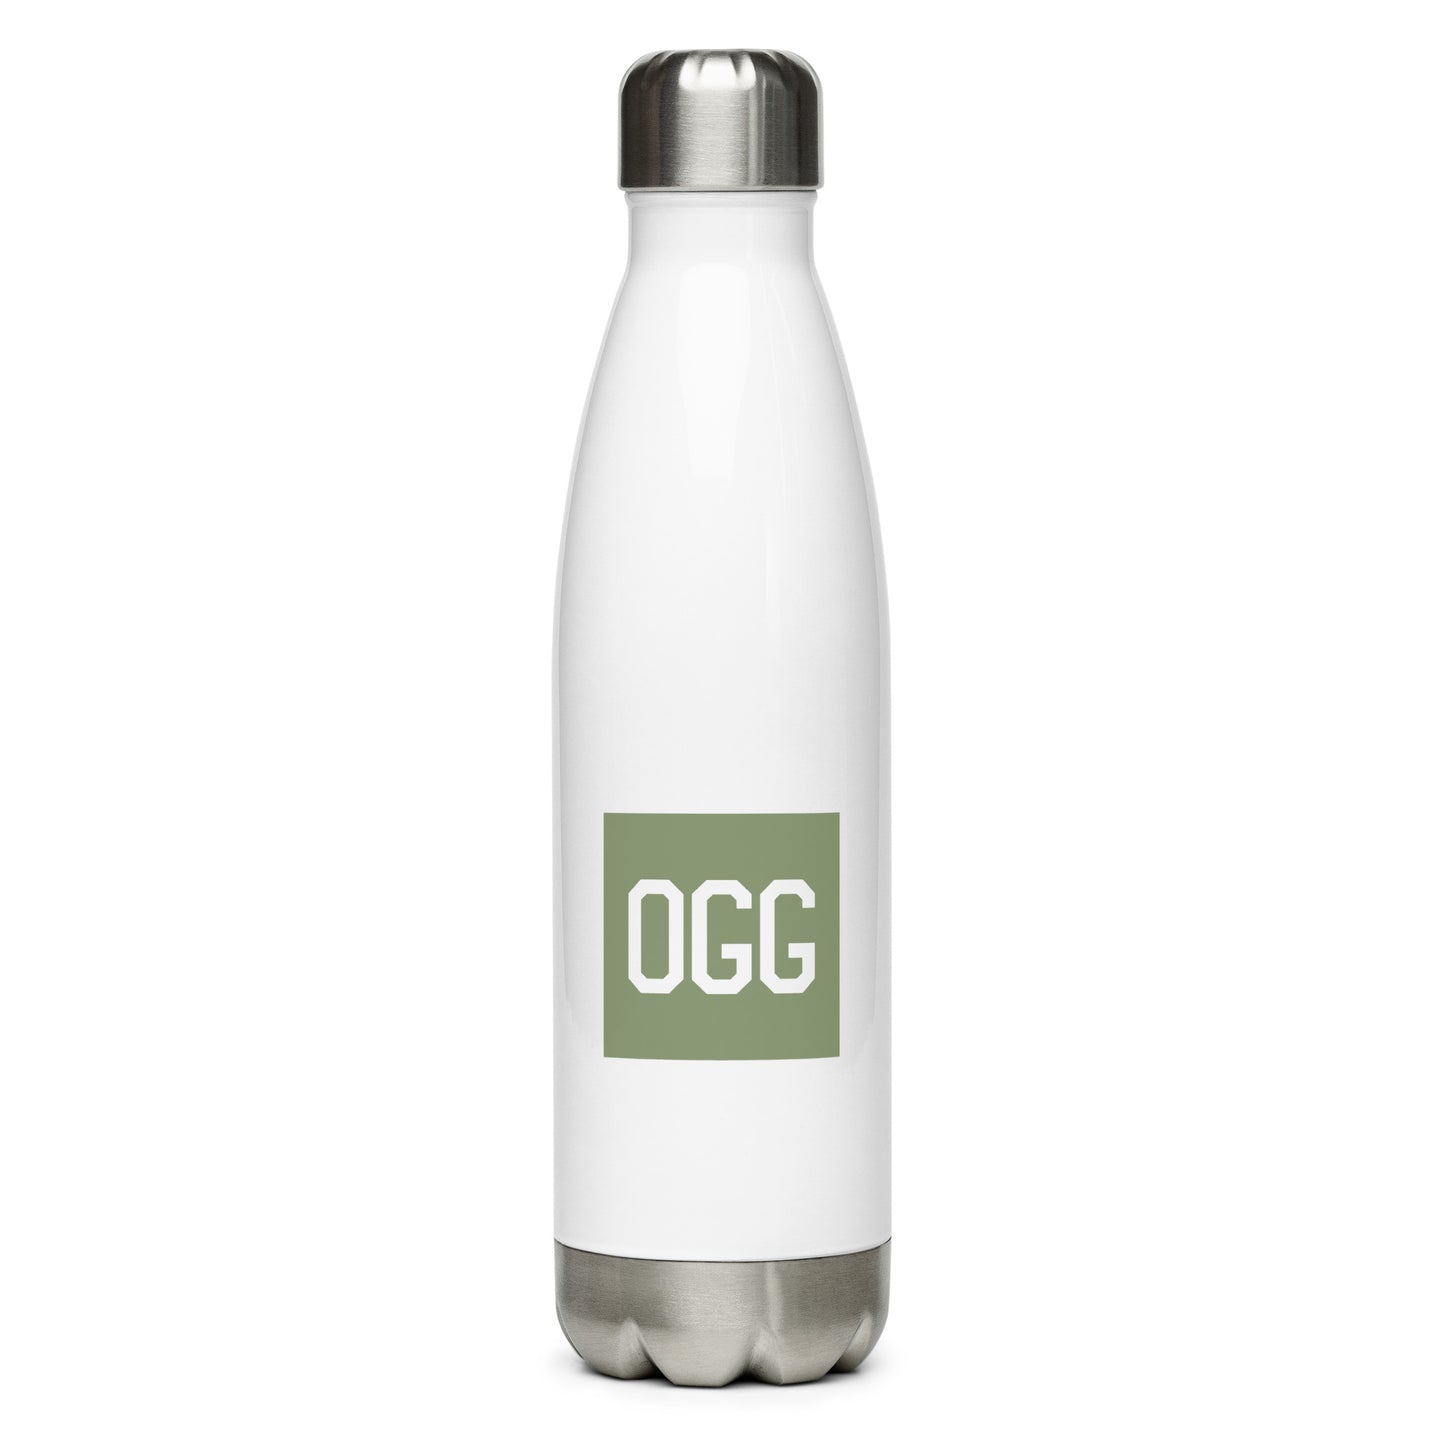 Aviation Gift Water Bottle - Camo Green • OGG Maui • YHM Designs - Image 01